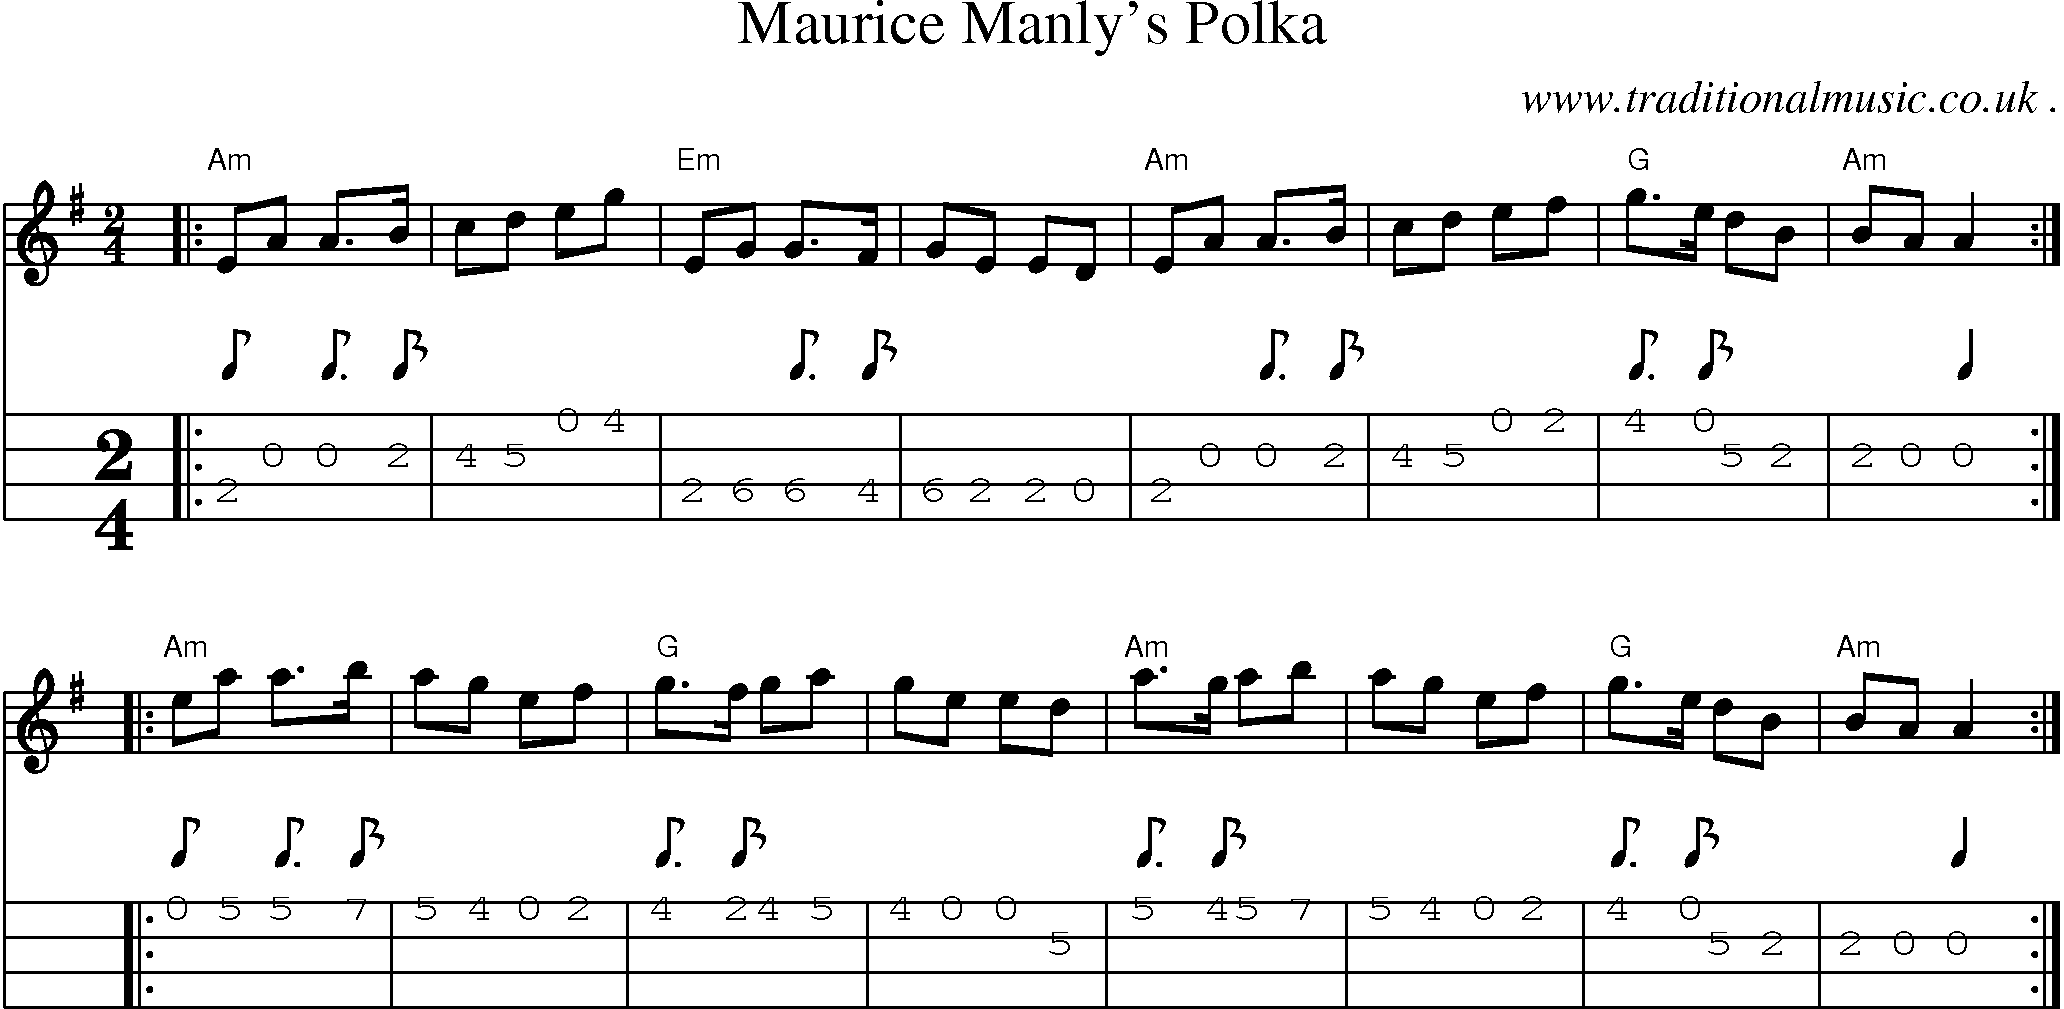 Sheet-music  score, Chords and Mandolin Tabs for Maurice Manlys Polka